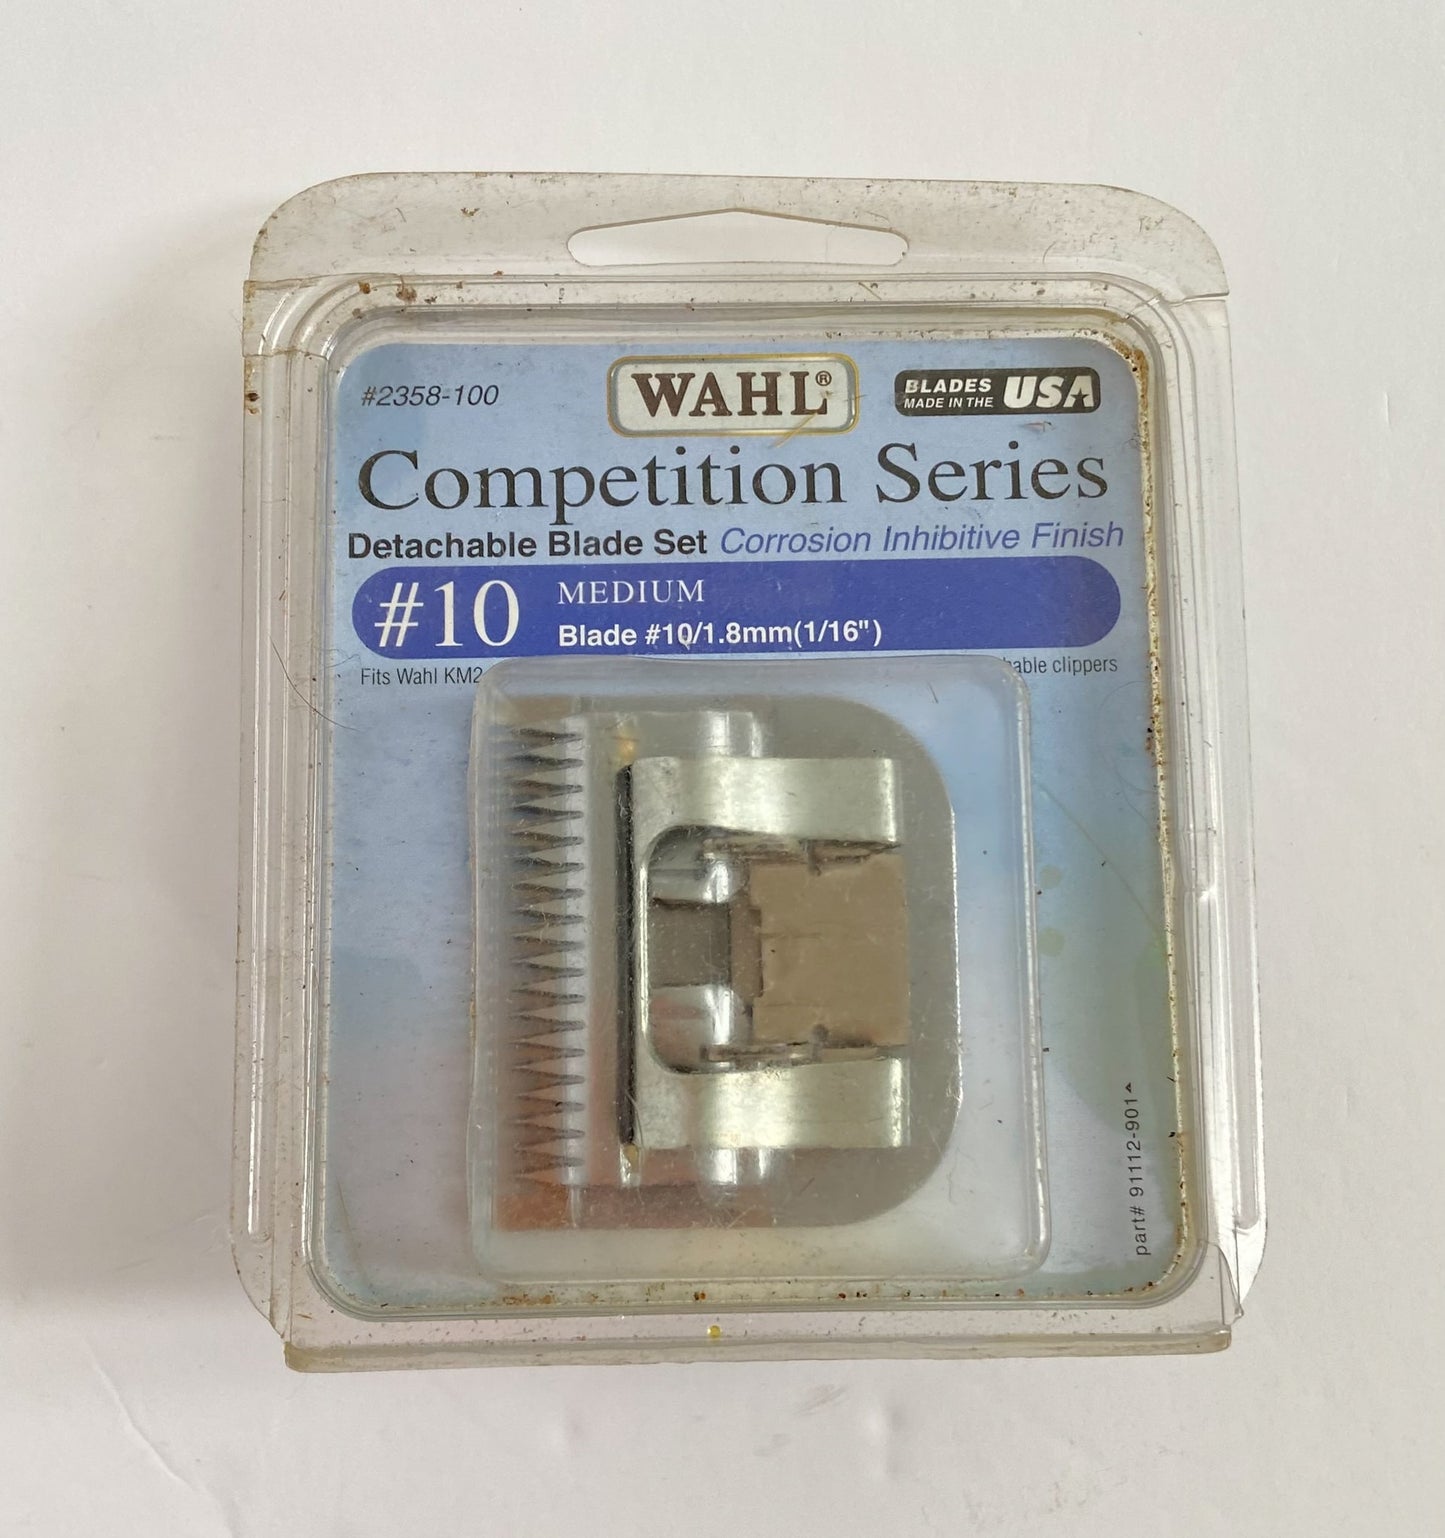 Wahl Competition Series Blade - Medium #10